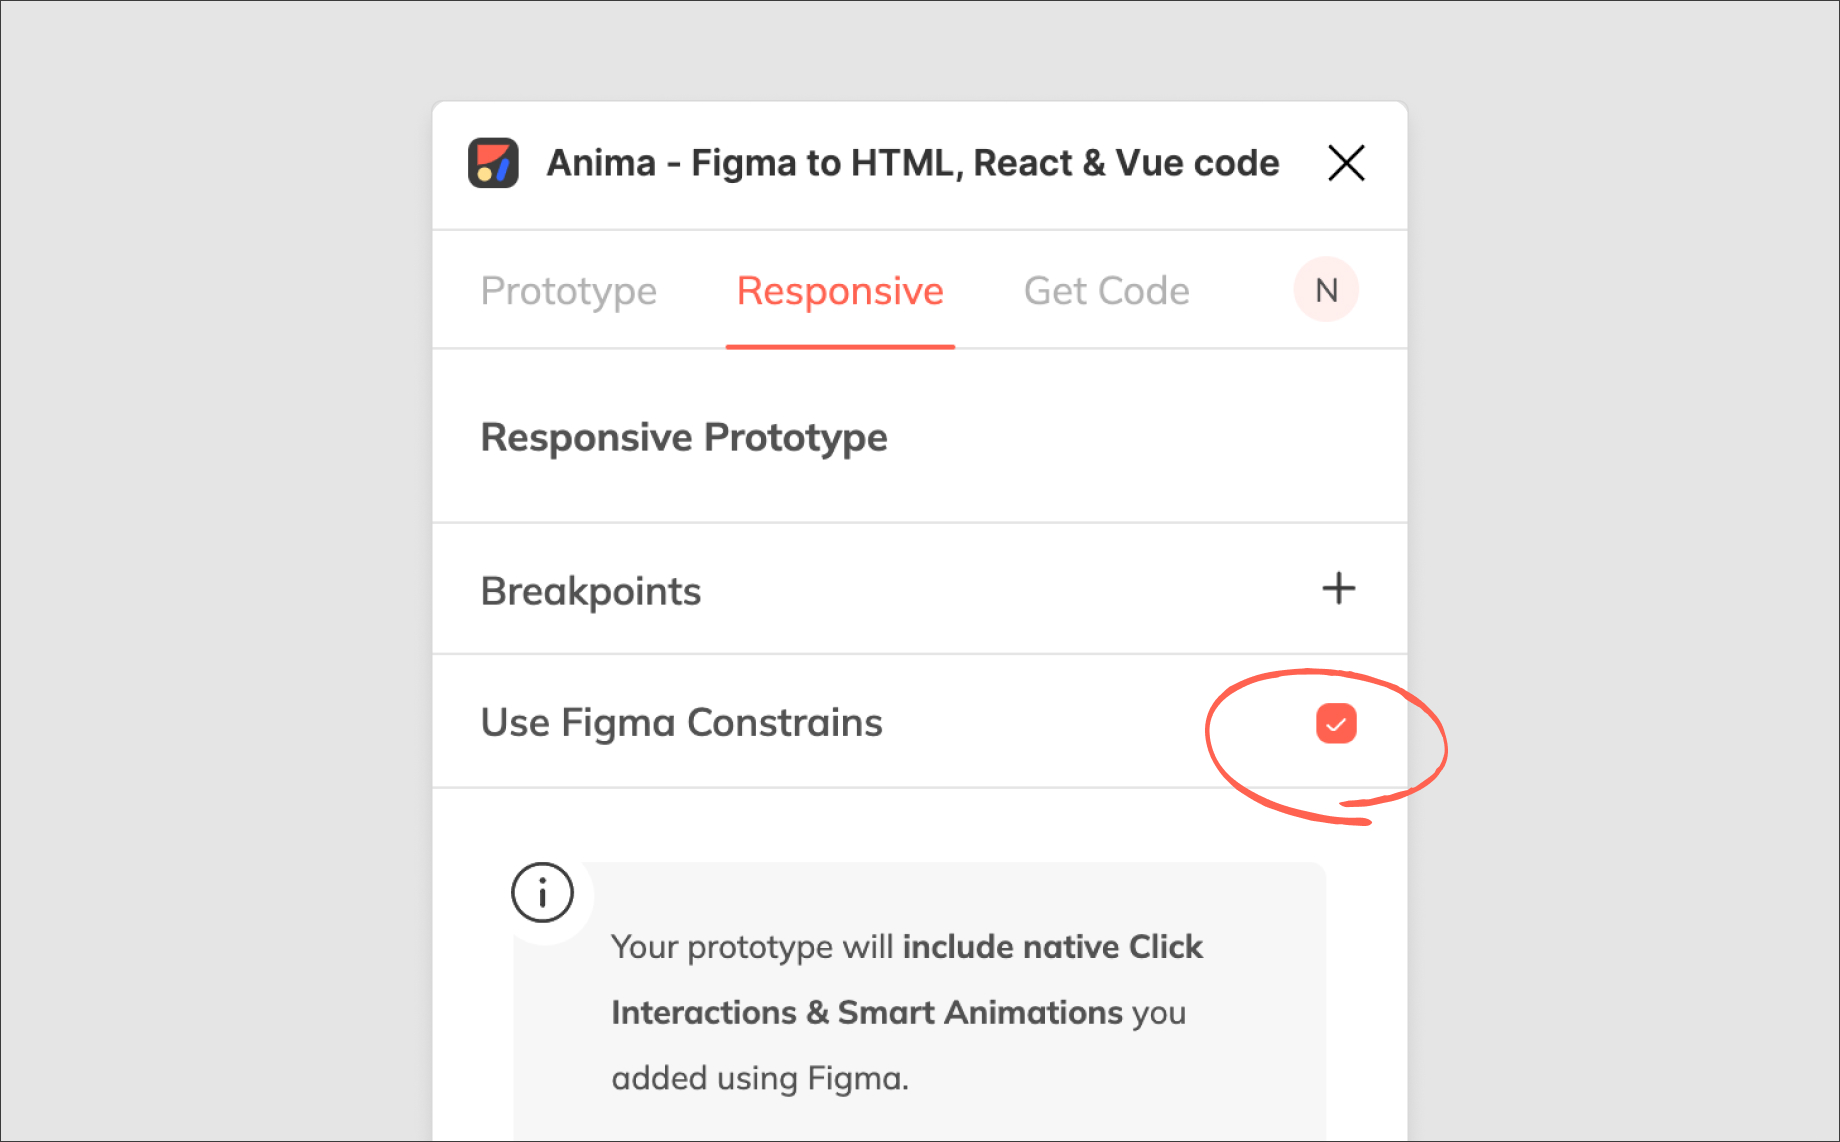 Sync your design and constraints to Anima